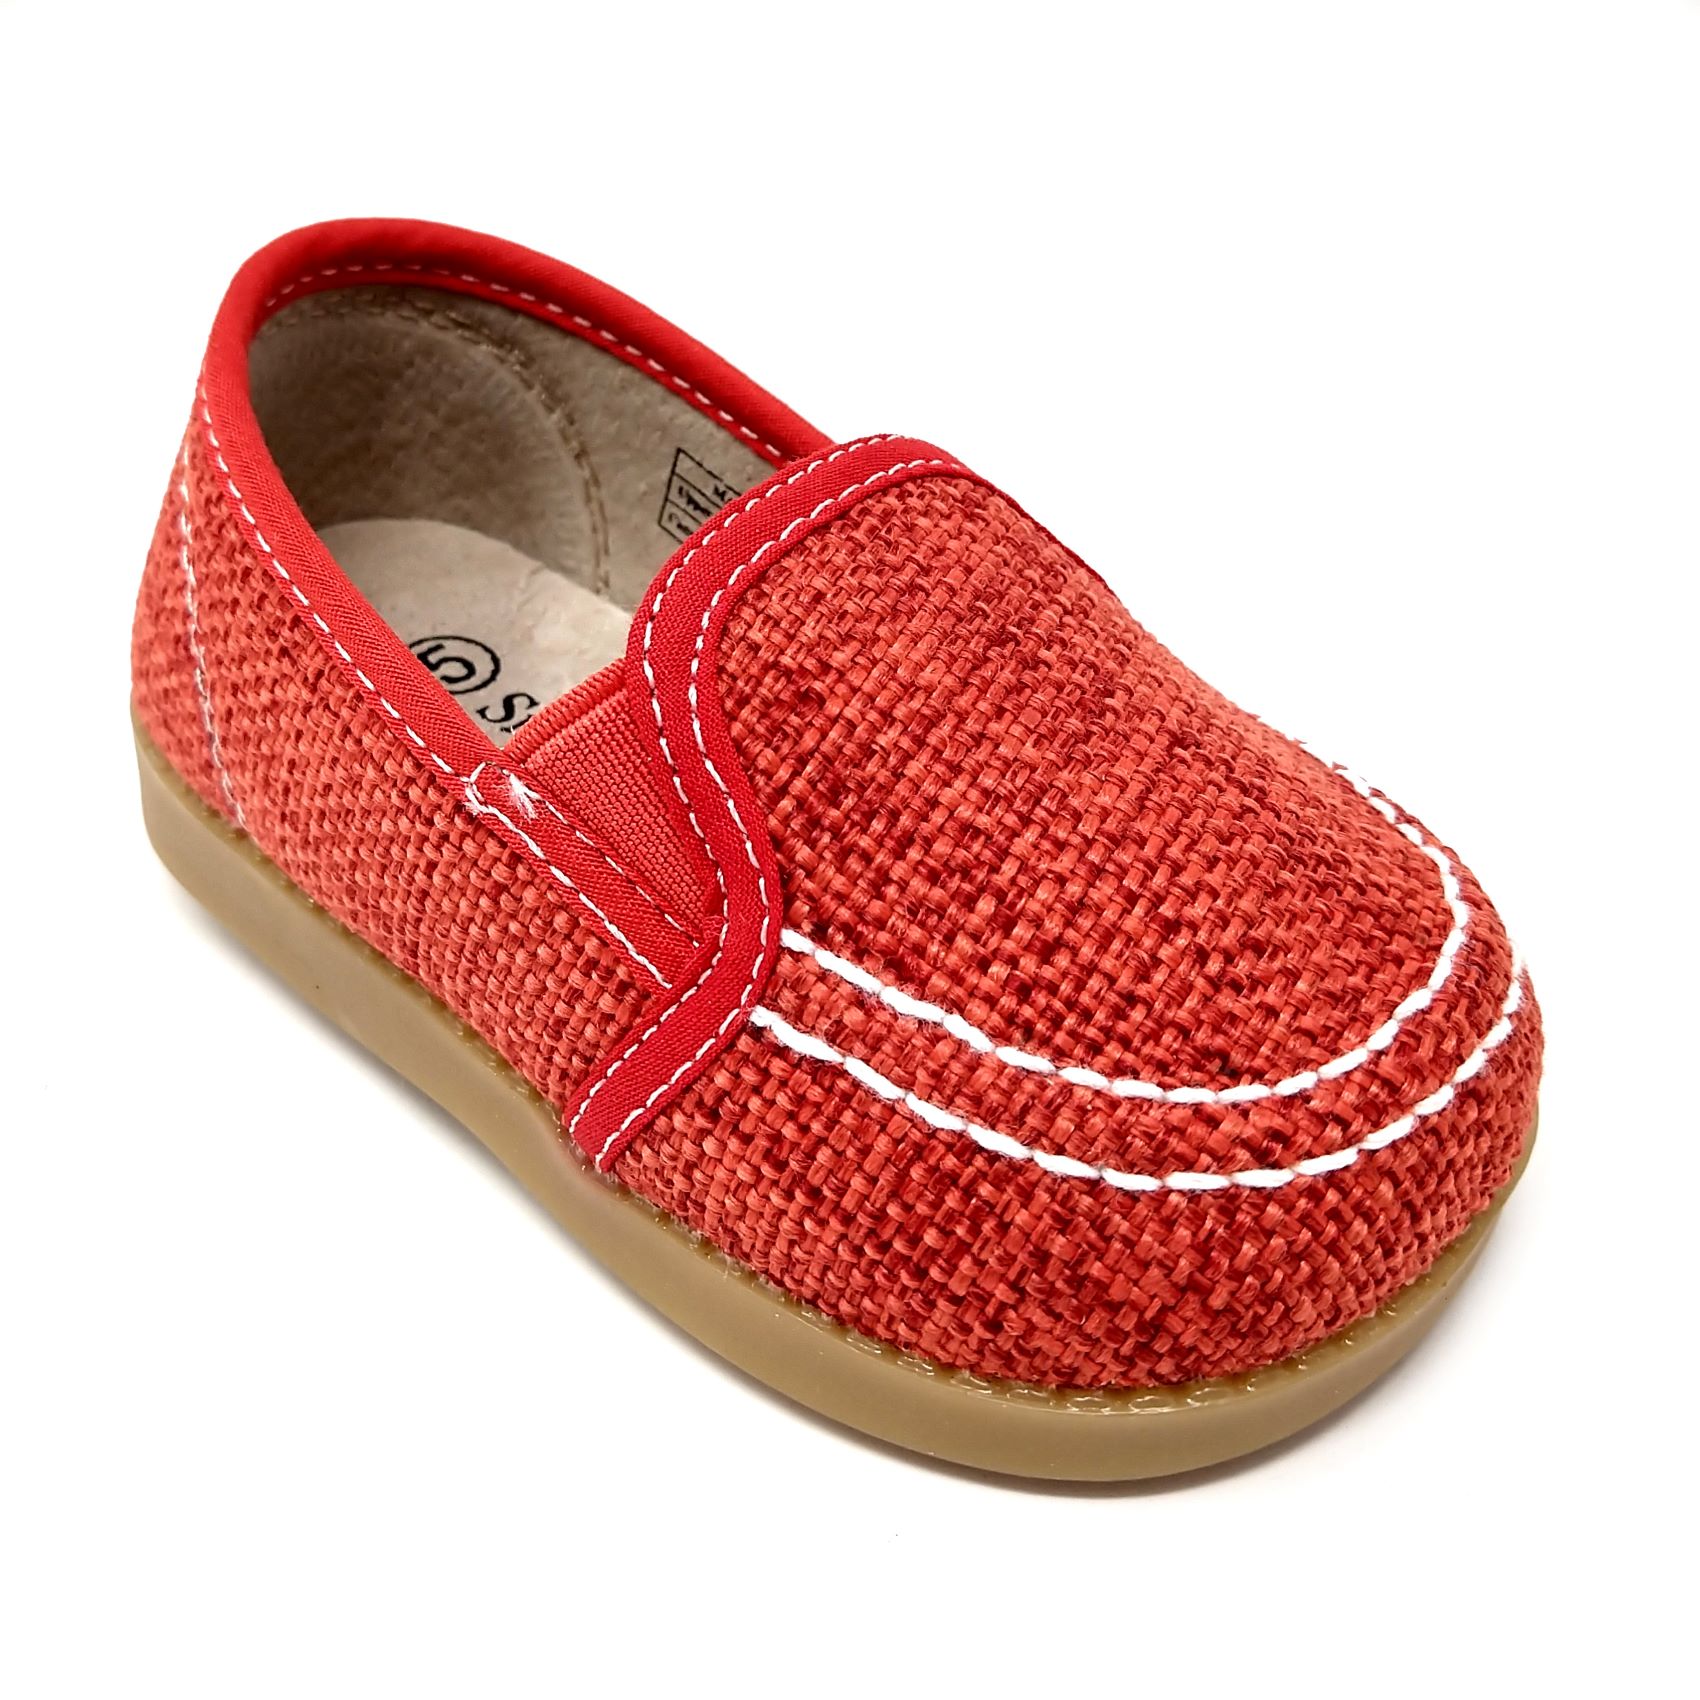 Red Slip-On Canvas Shoe